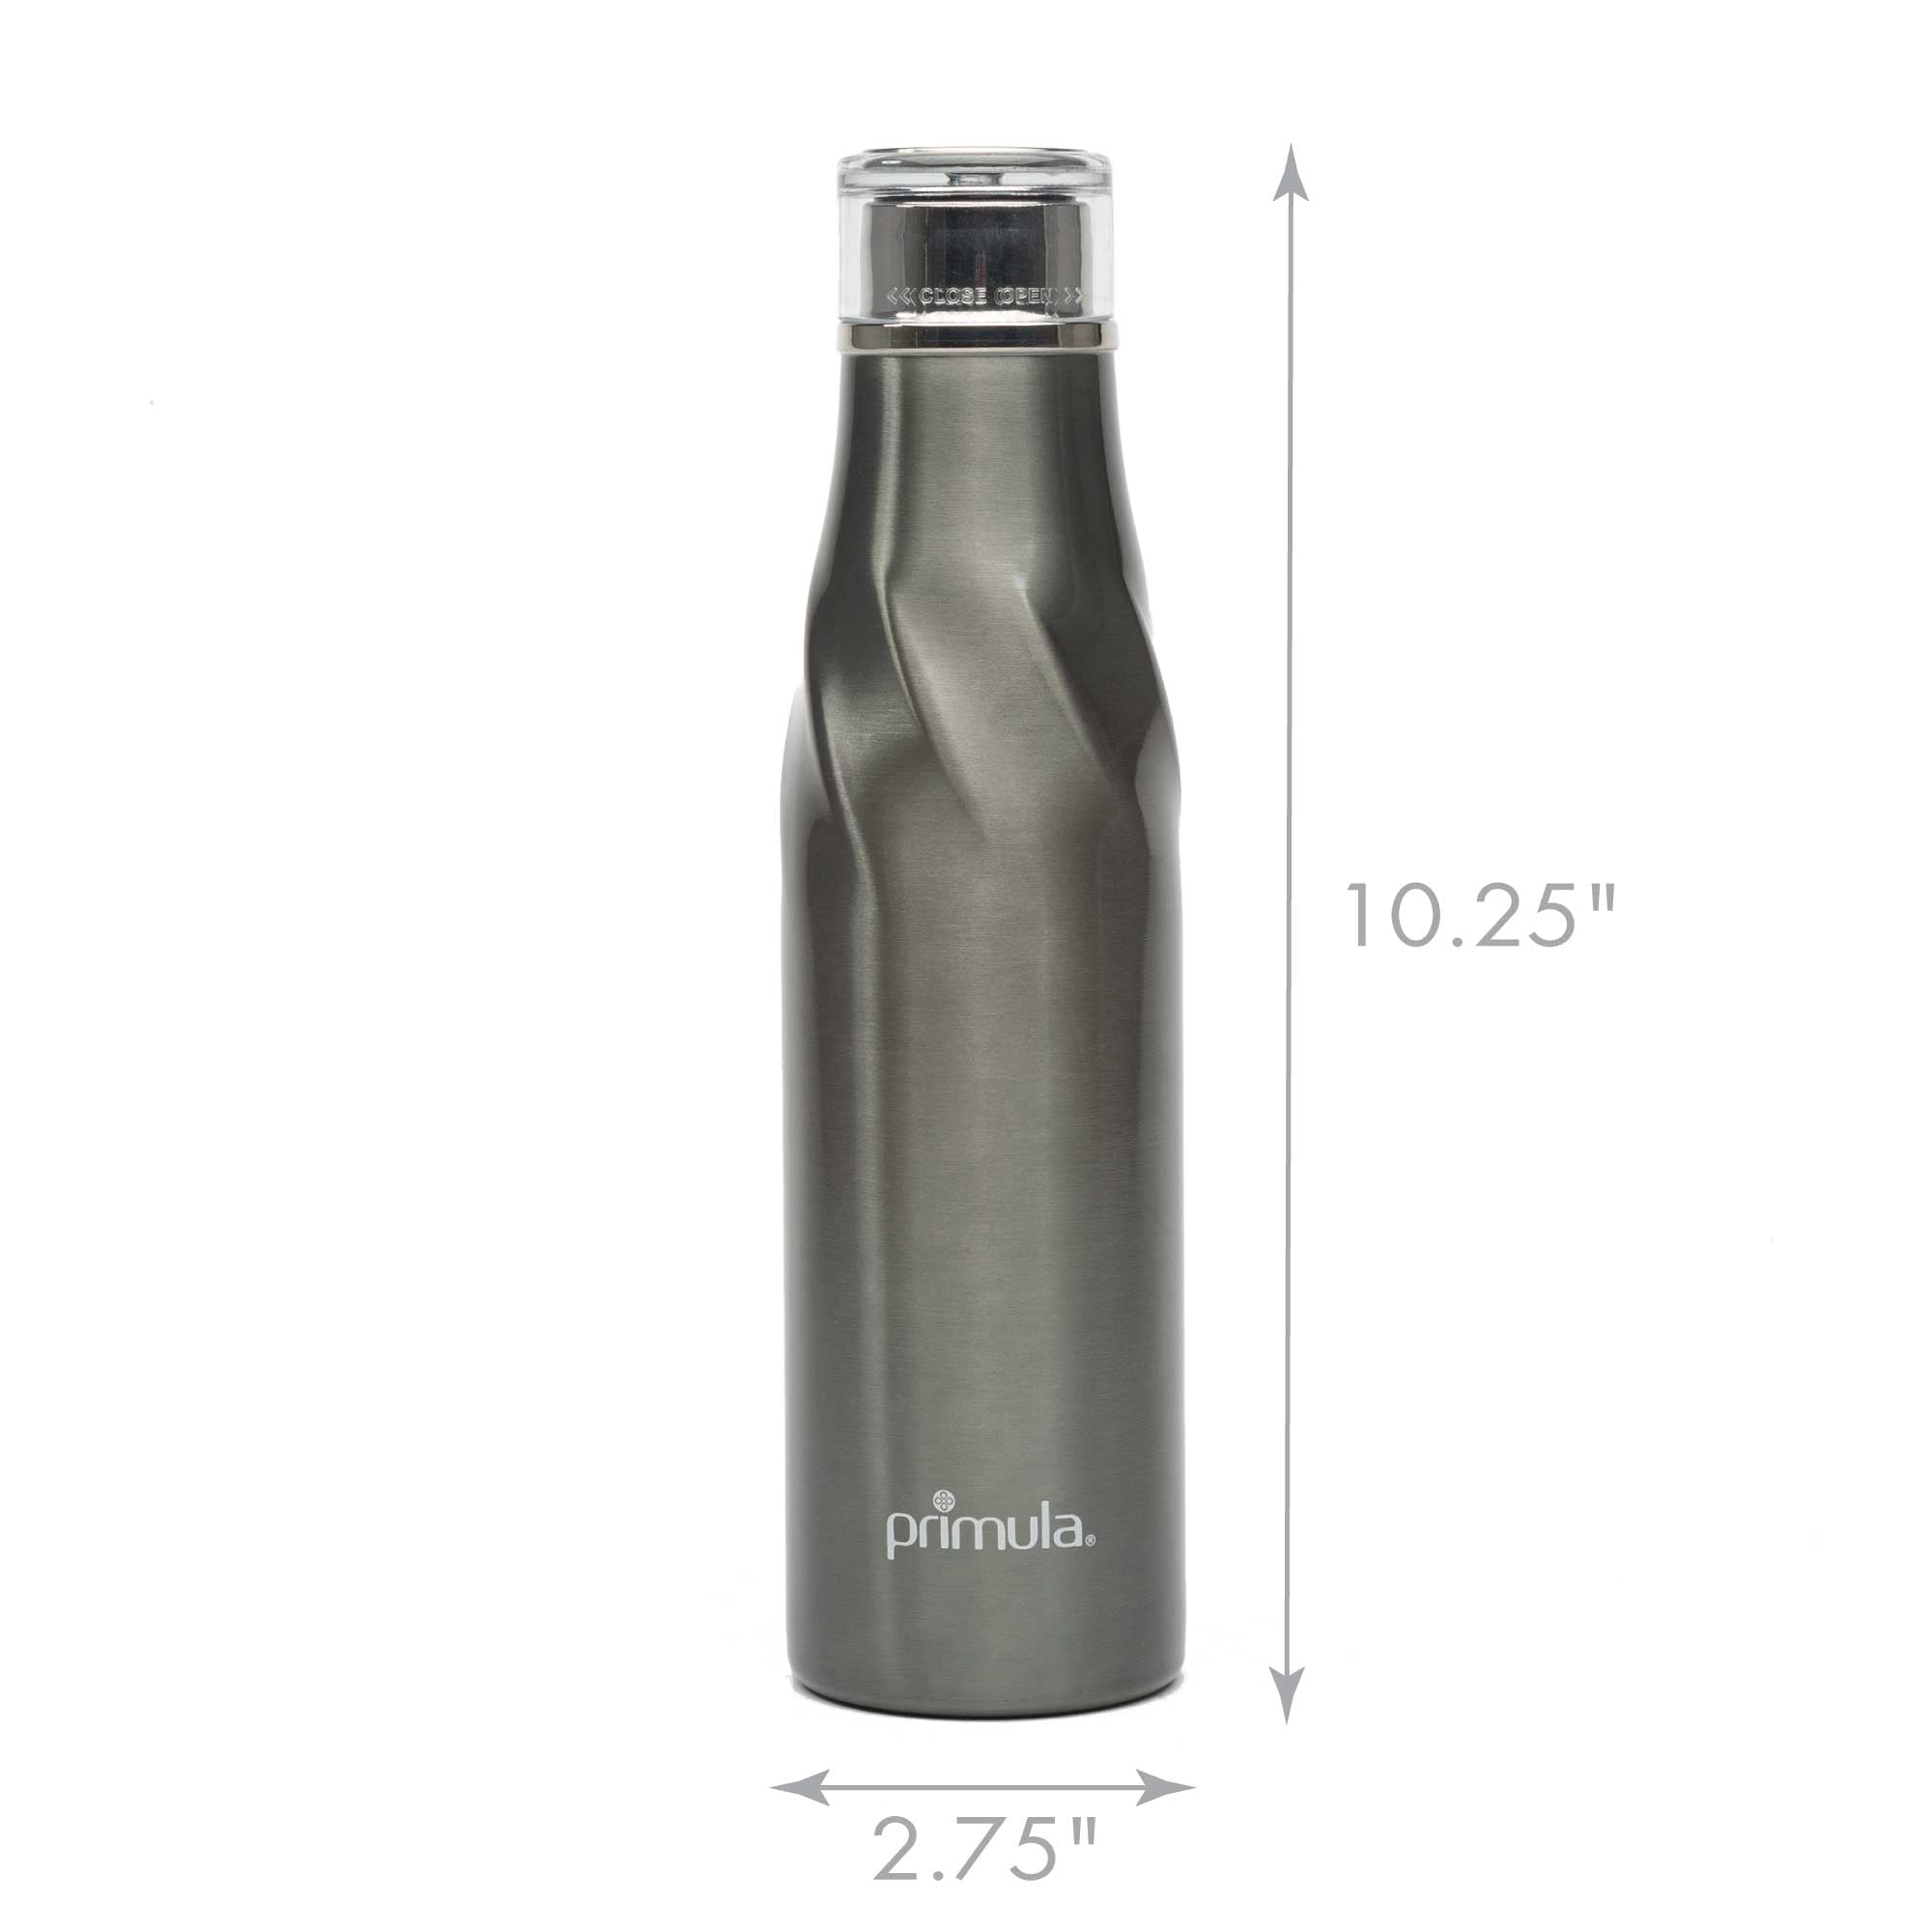 Primula Gray 18oz Stainless Steel Water Bottle with Wide Mouth and Screw Cap, 4 Pack